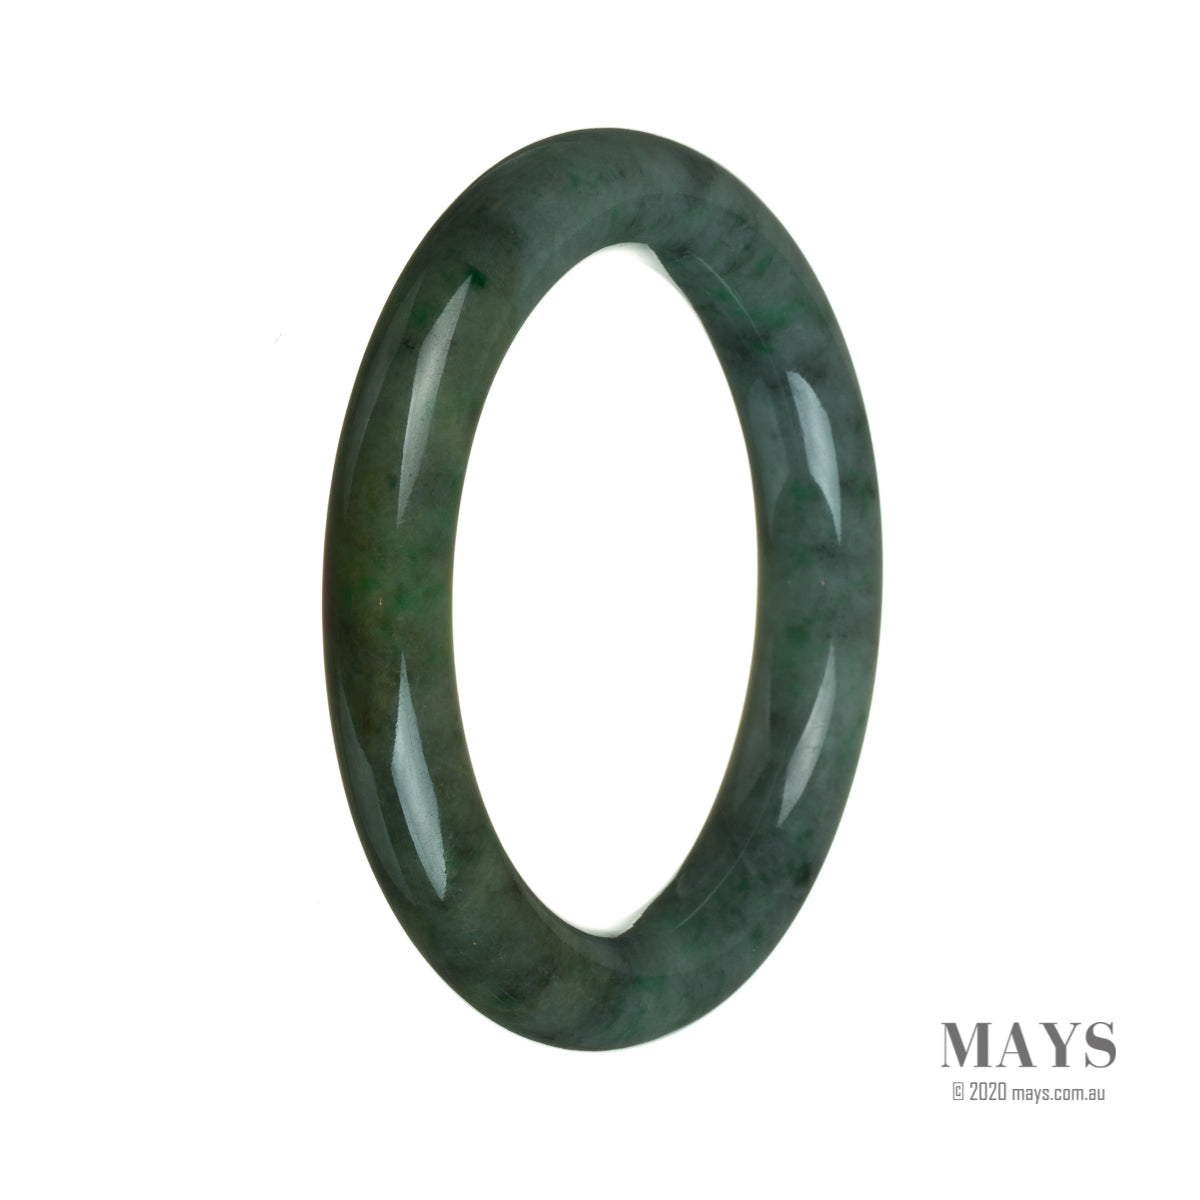 A close-up photo of a round, deep green Burmese jade bracelet with a smooth, polished surface and a diameter of 61mm. The bracelet has an authentic, natural look and is beautifully crafted.